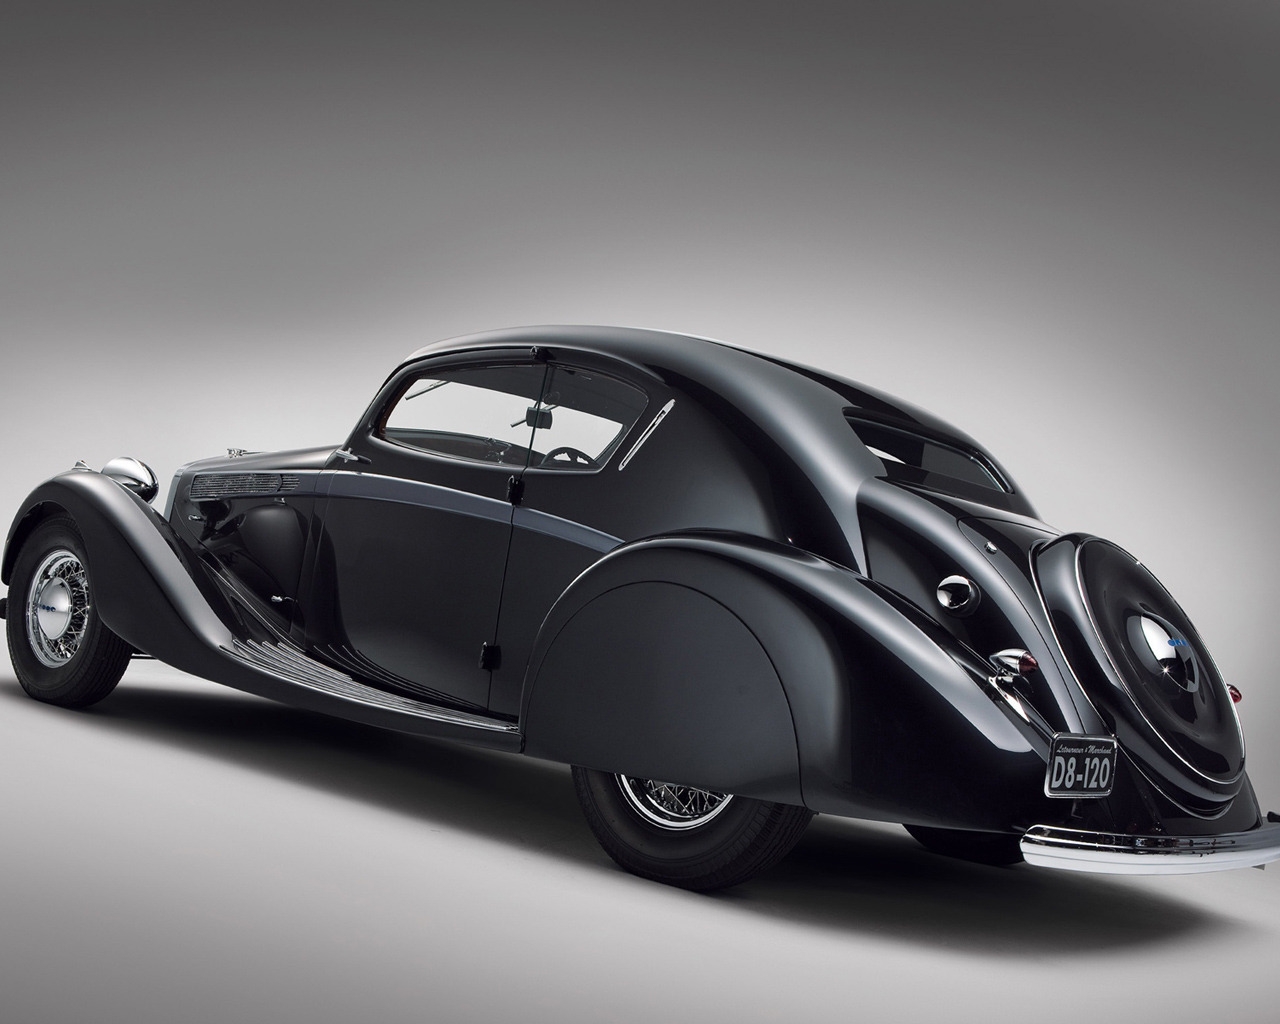 Delage D8 120 Aerosport Coupe for 1280 x 1024 resolution